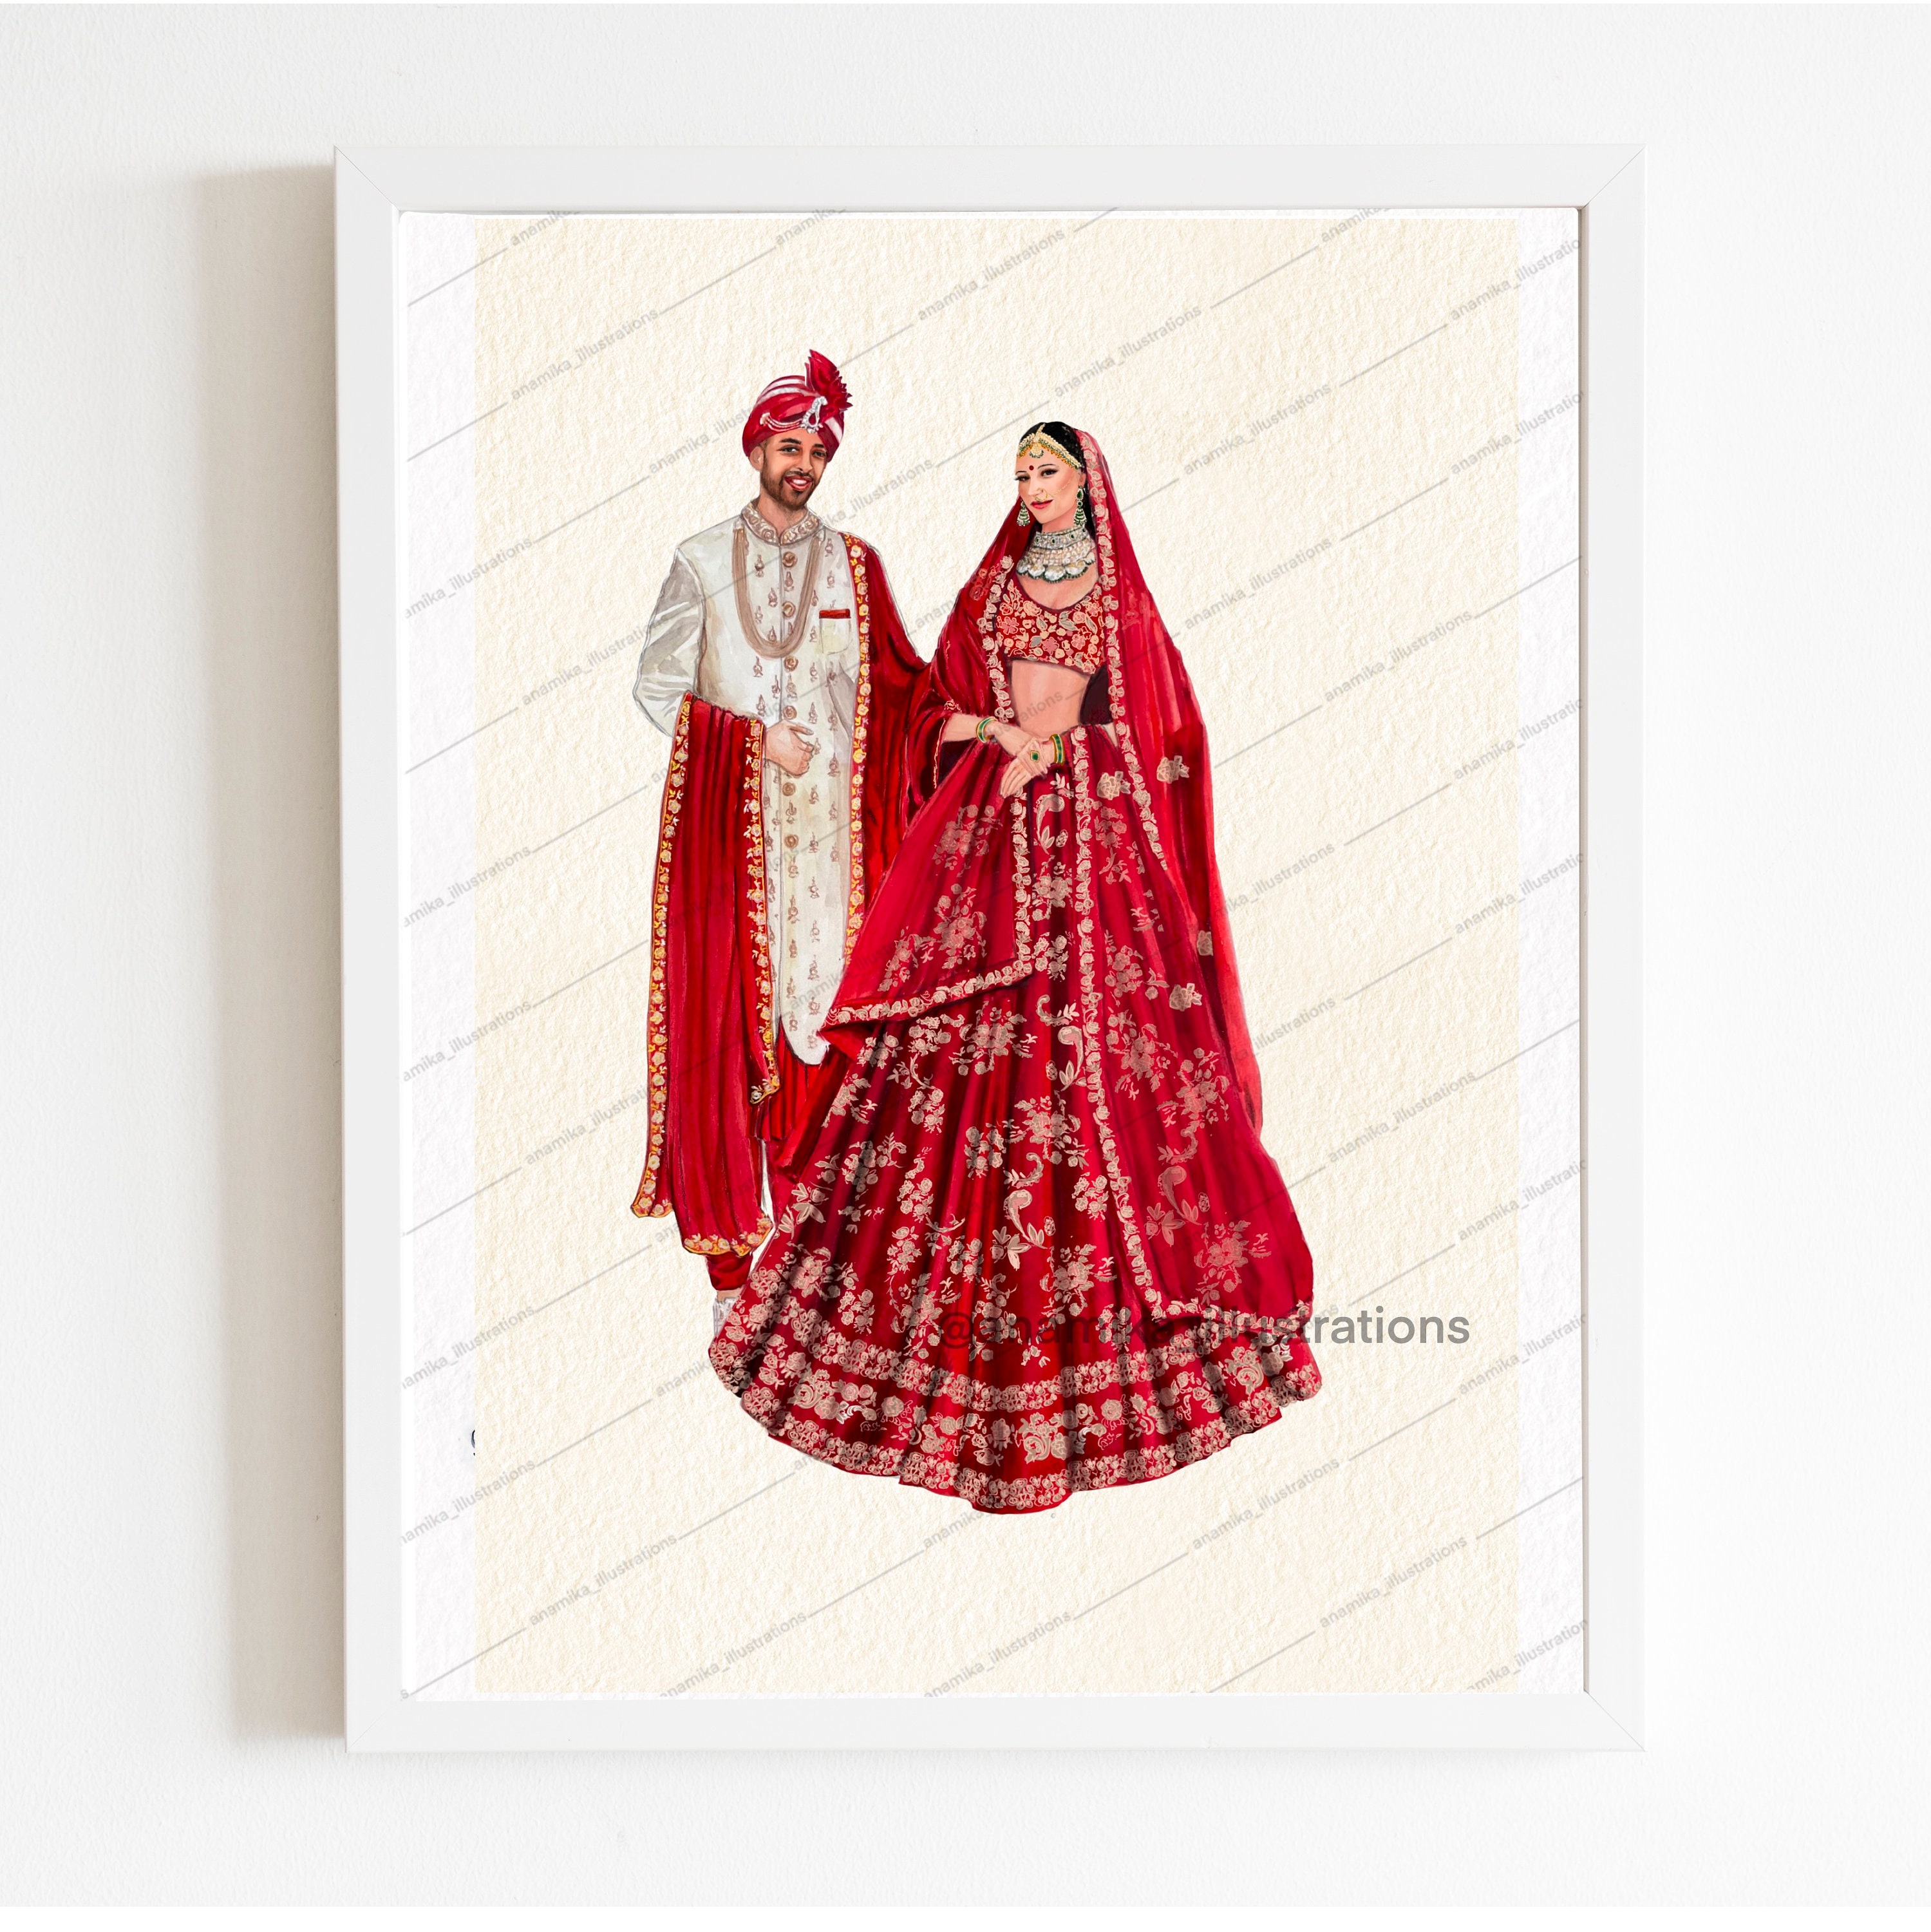 Draw indian bridal fashion illustration in my style by Devanshinasit |  Fiverr